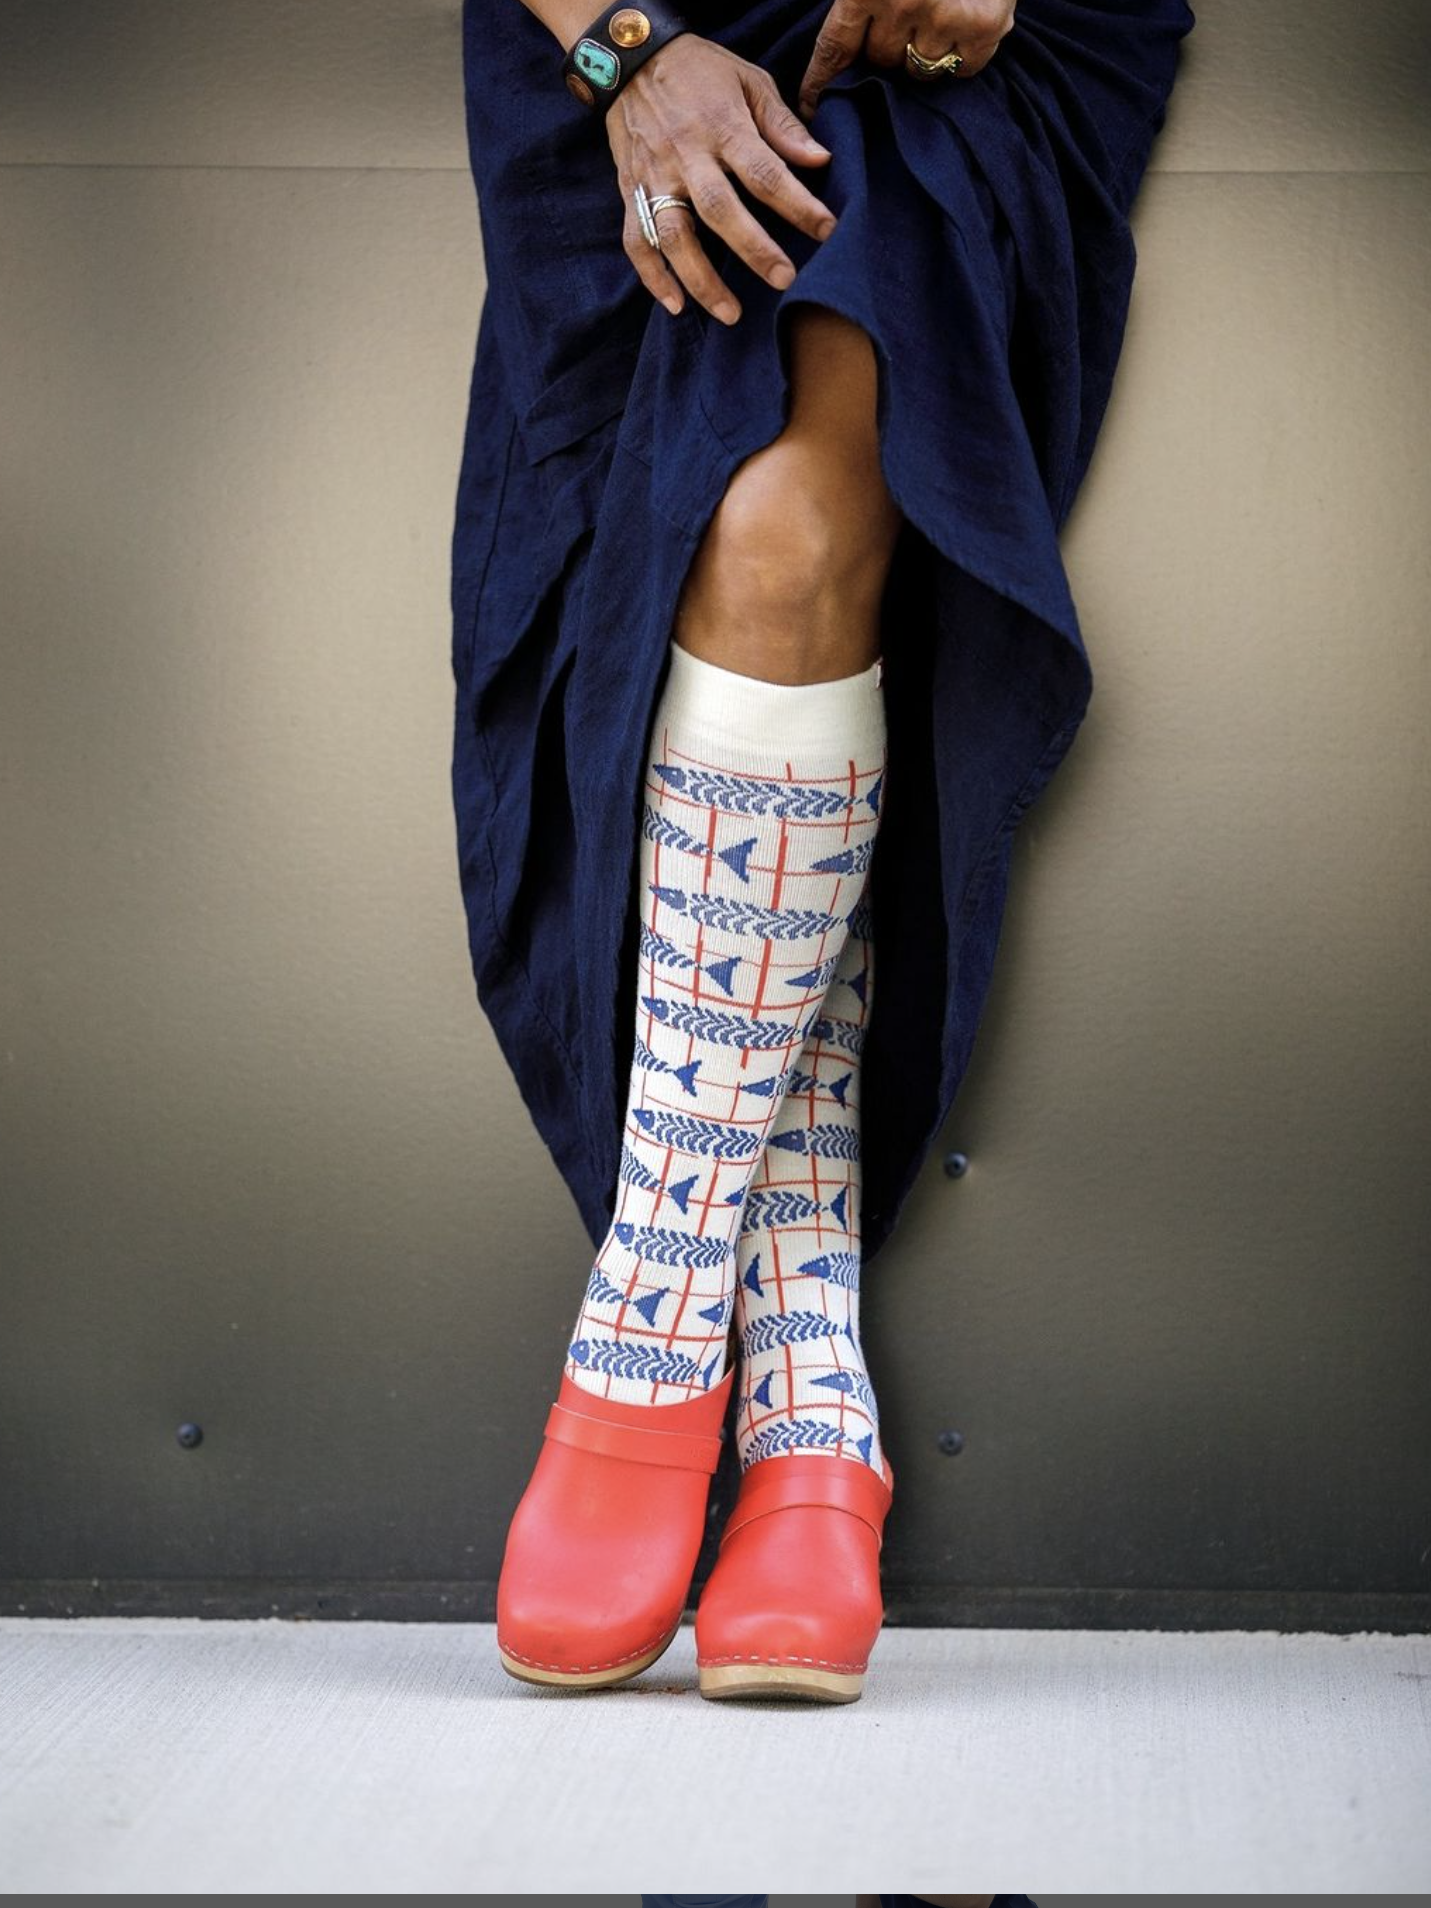 A person wearing patterned compression socks and red rubber boots, with a dark blue garment draped over.